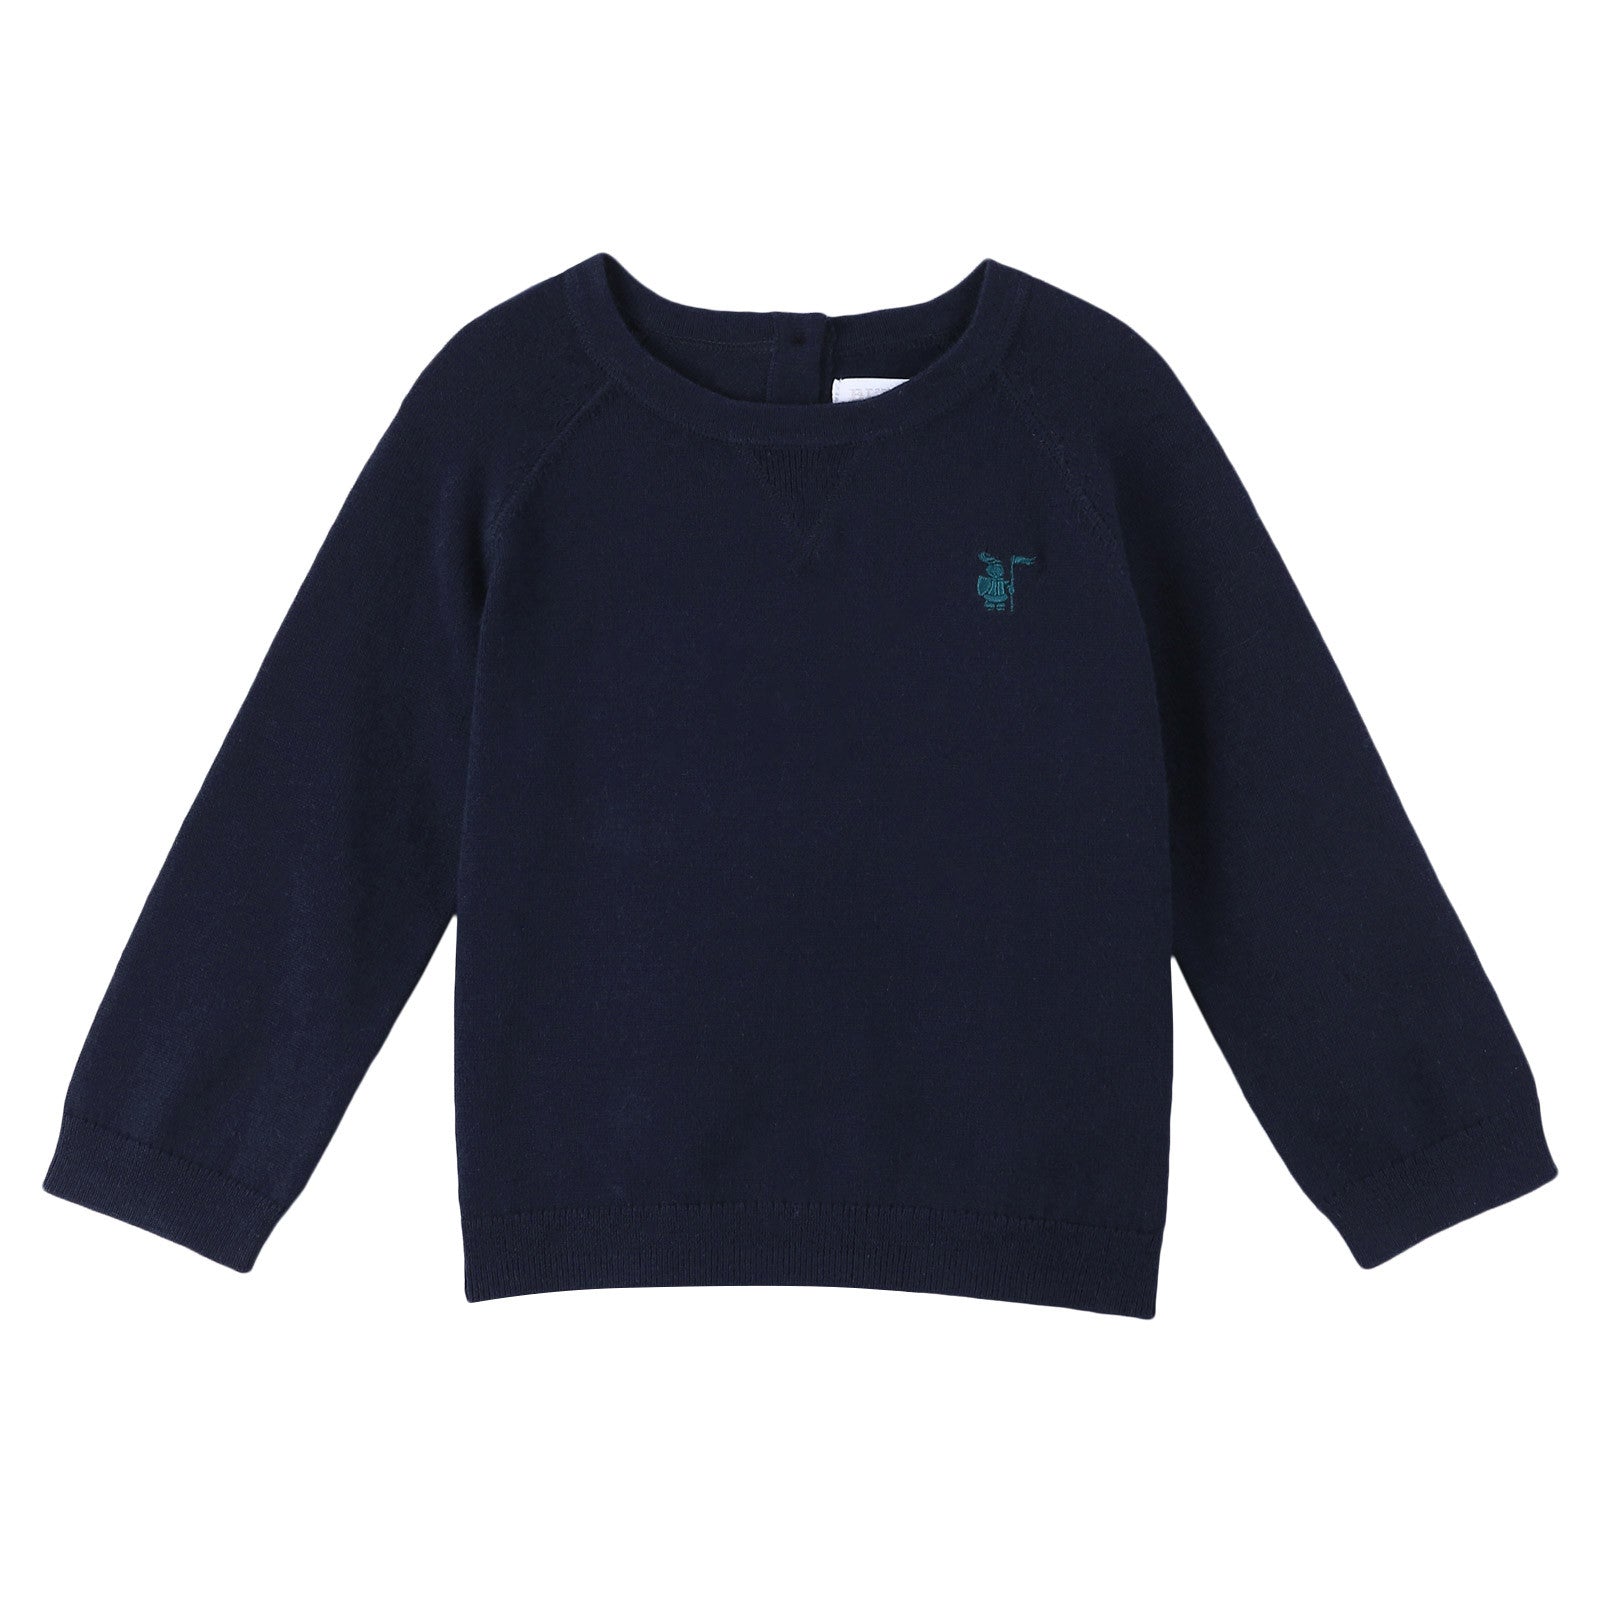 Baby Boys Navy Blue Knitted Cotton Sweater - CÉMAROSE | Children's Fashion Store - 1